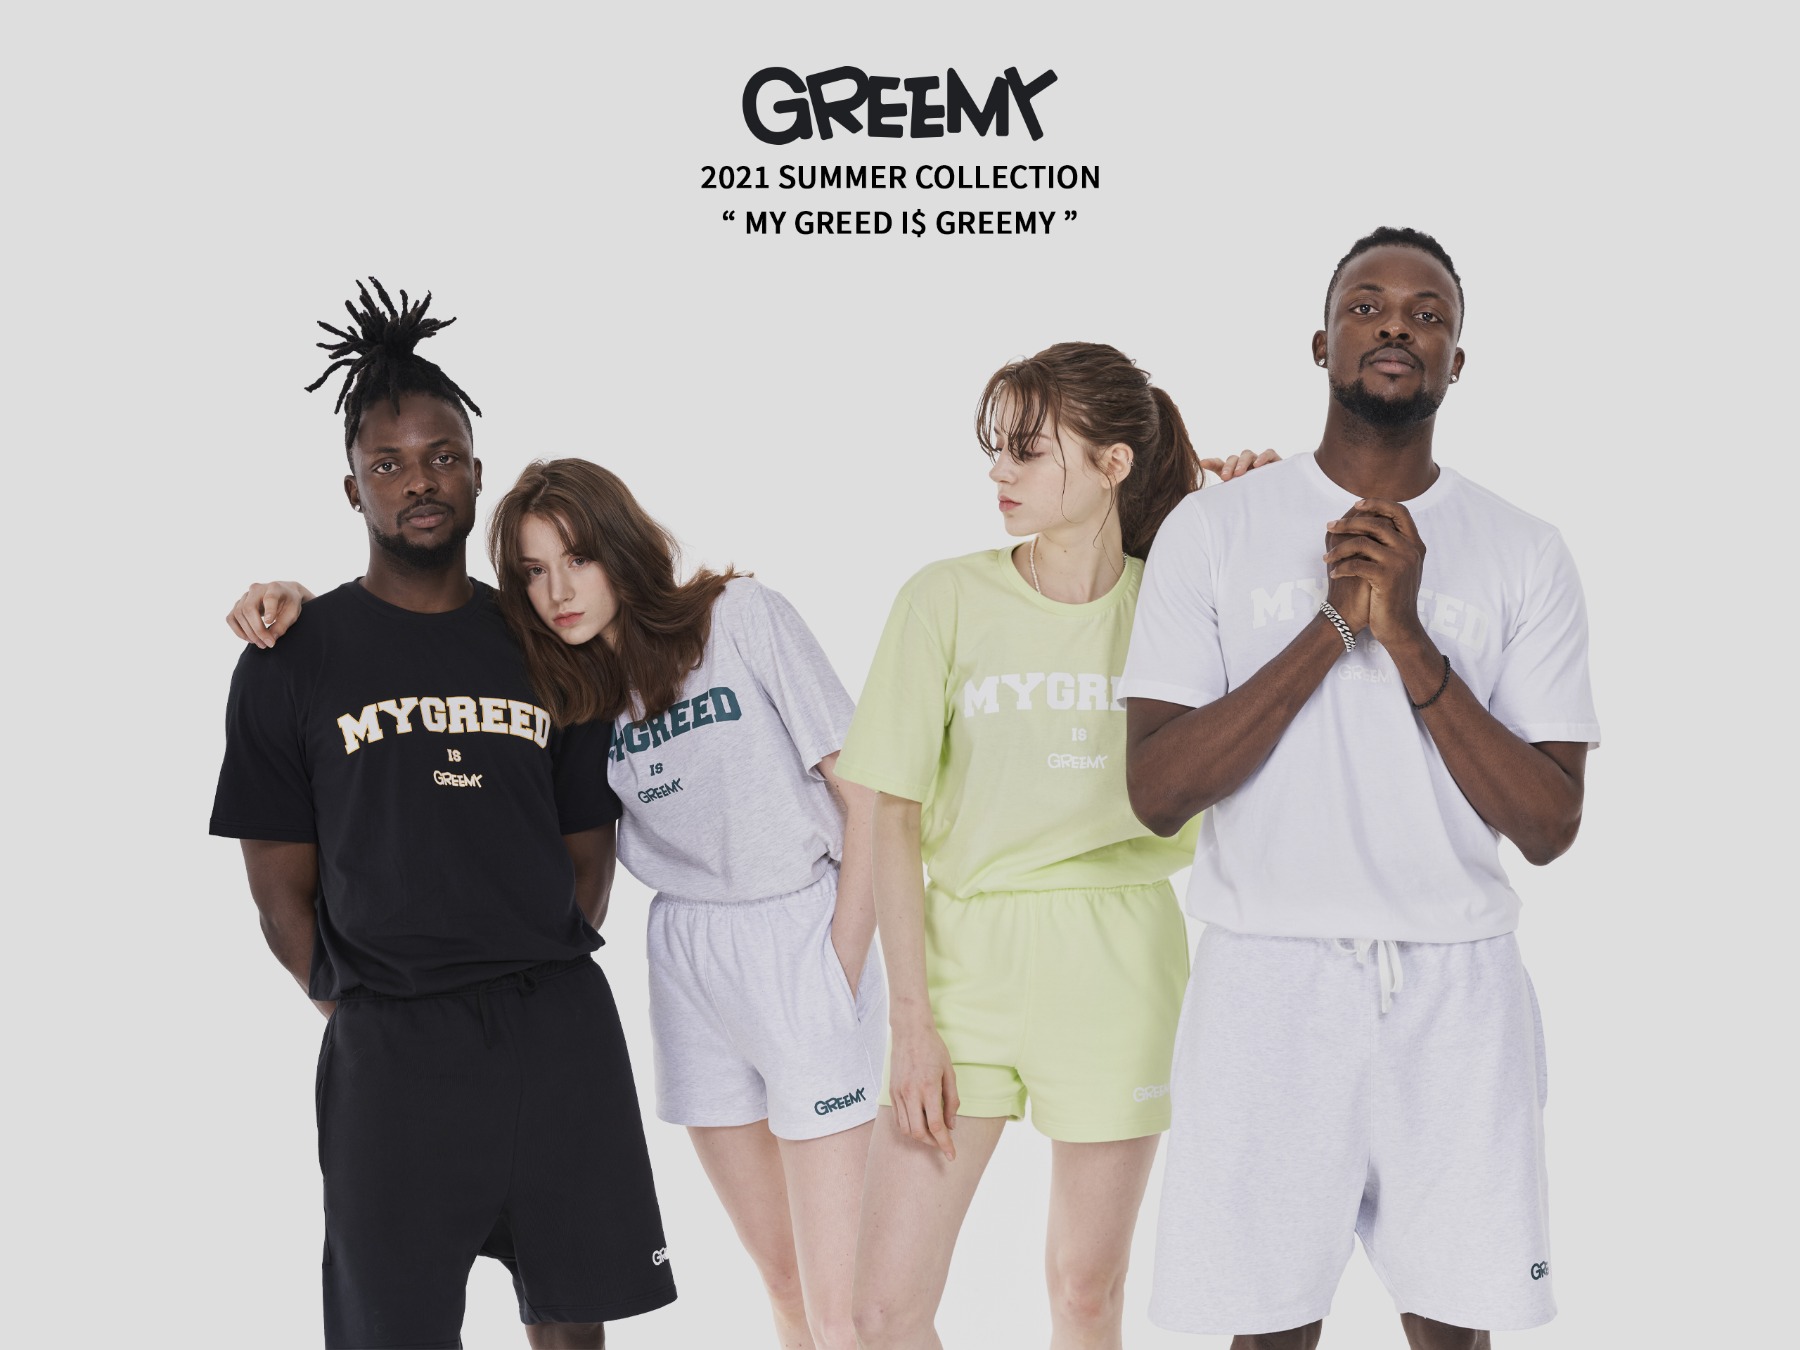 GREEMY 2021 Summer Collection